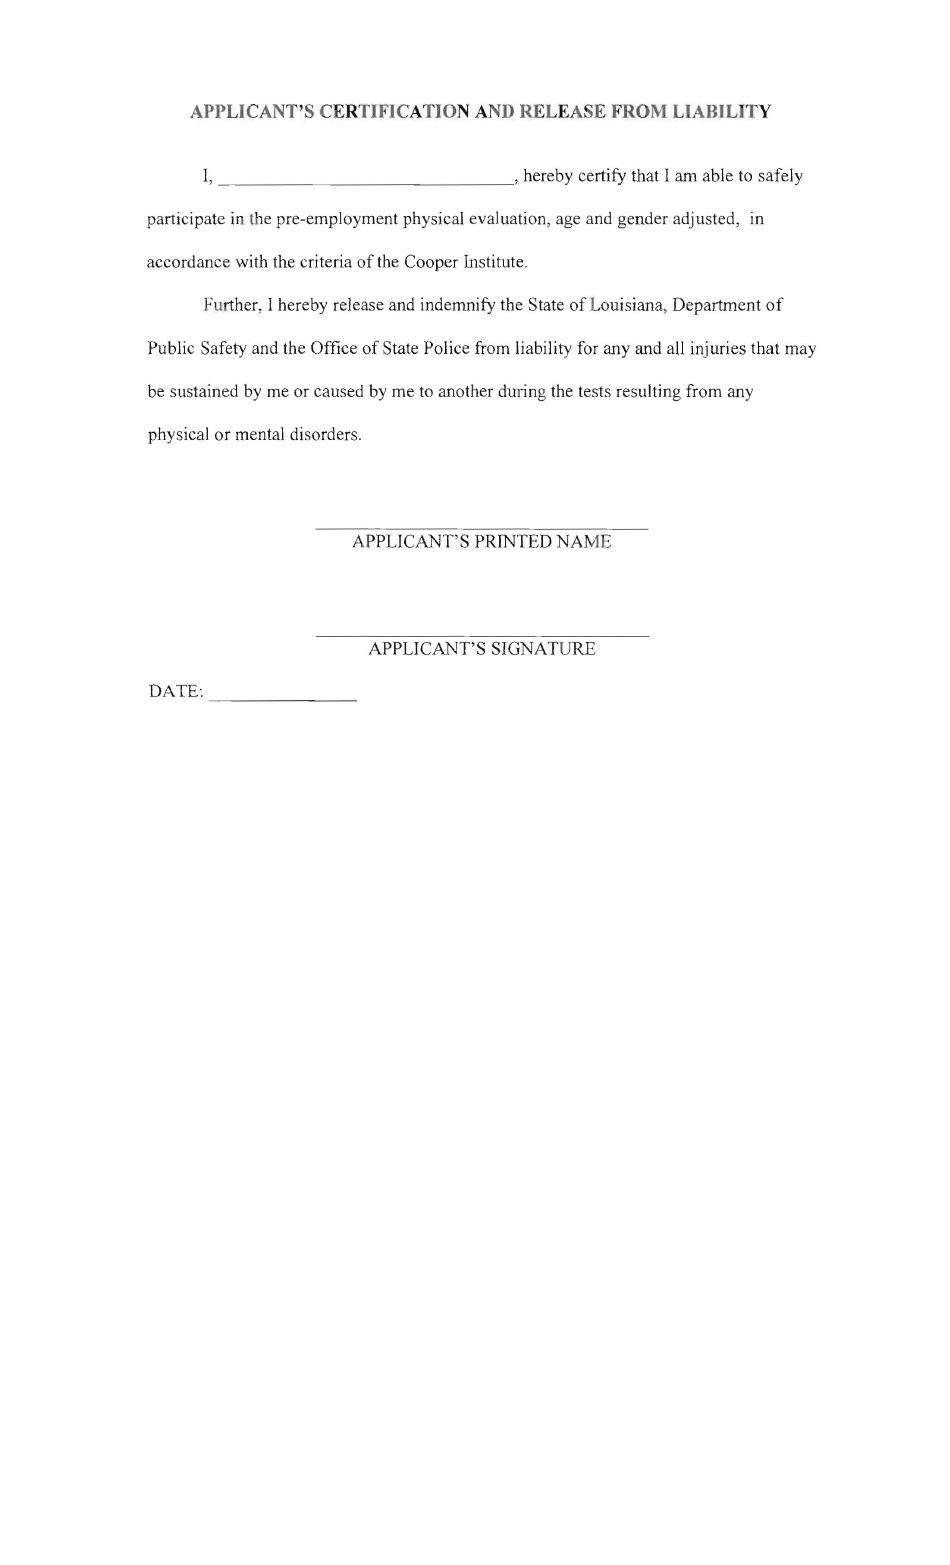 Applicants Certification and Release From Liability - Louisiana, Page 1